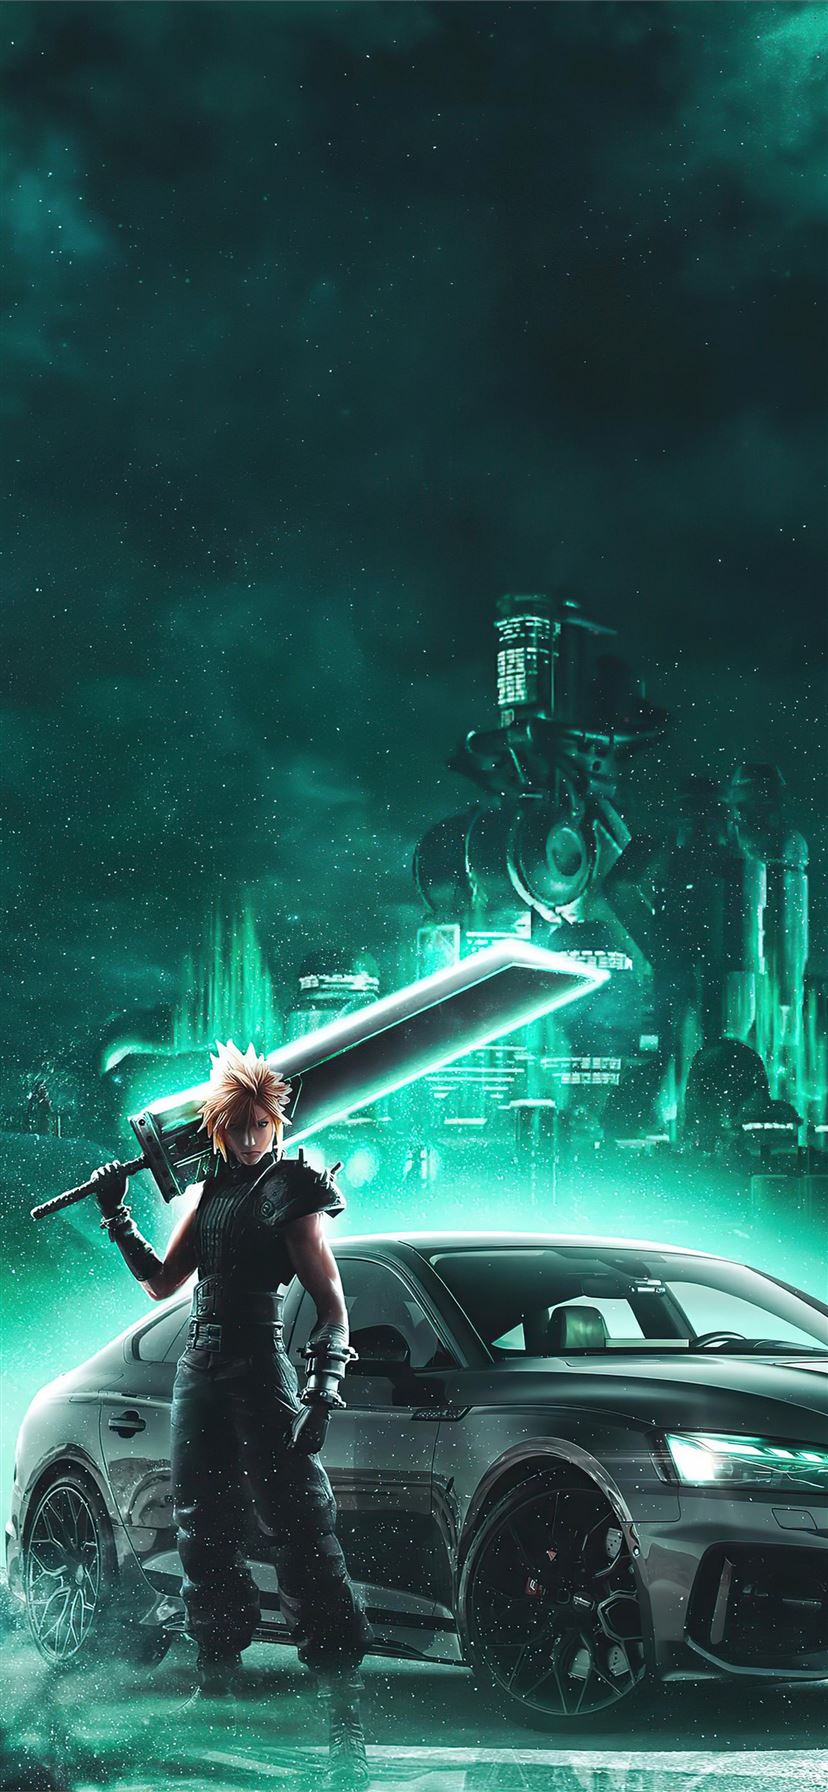 Final Fantasy 7 Wallpaper HD 72 pictures